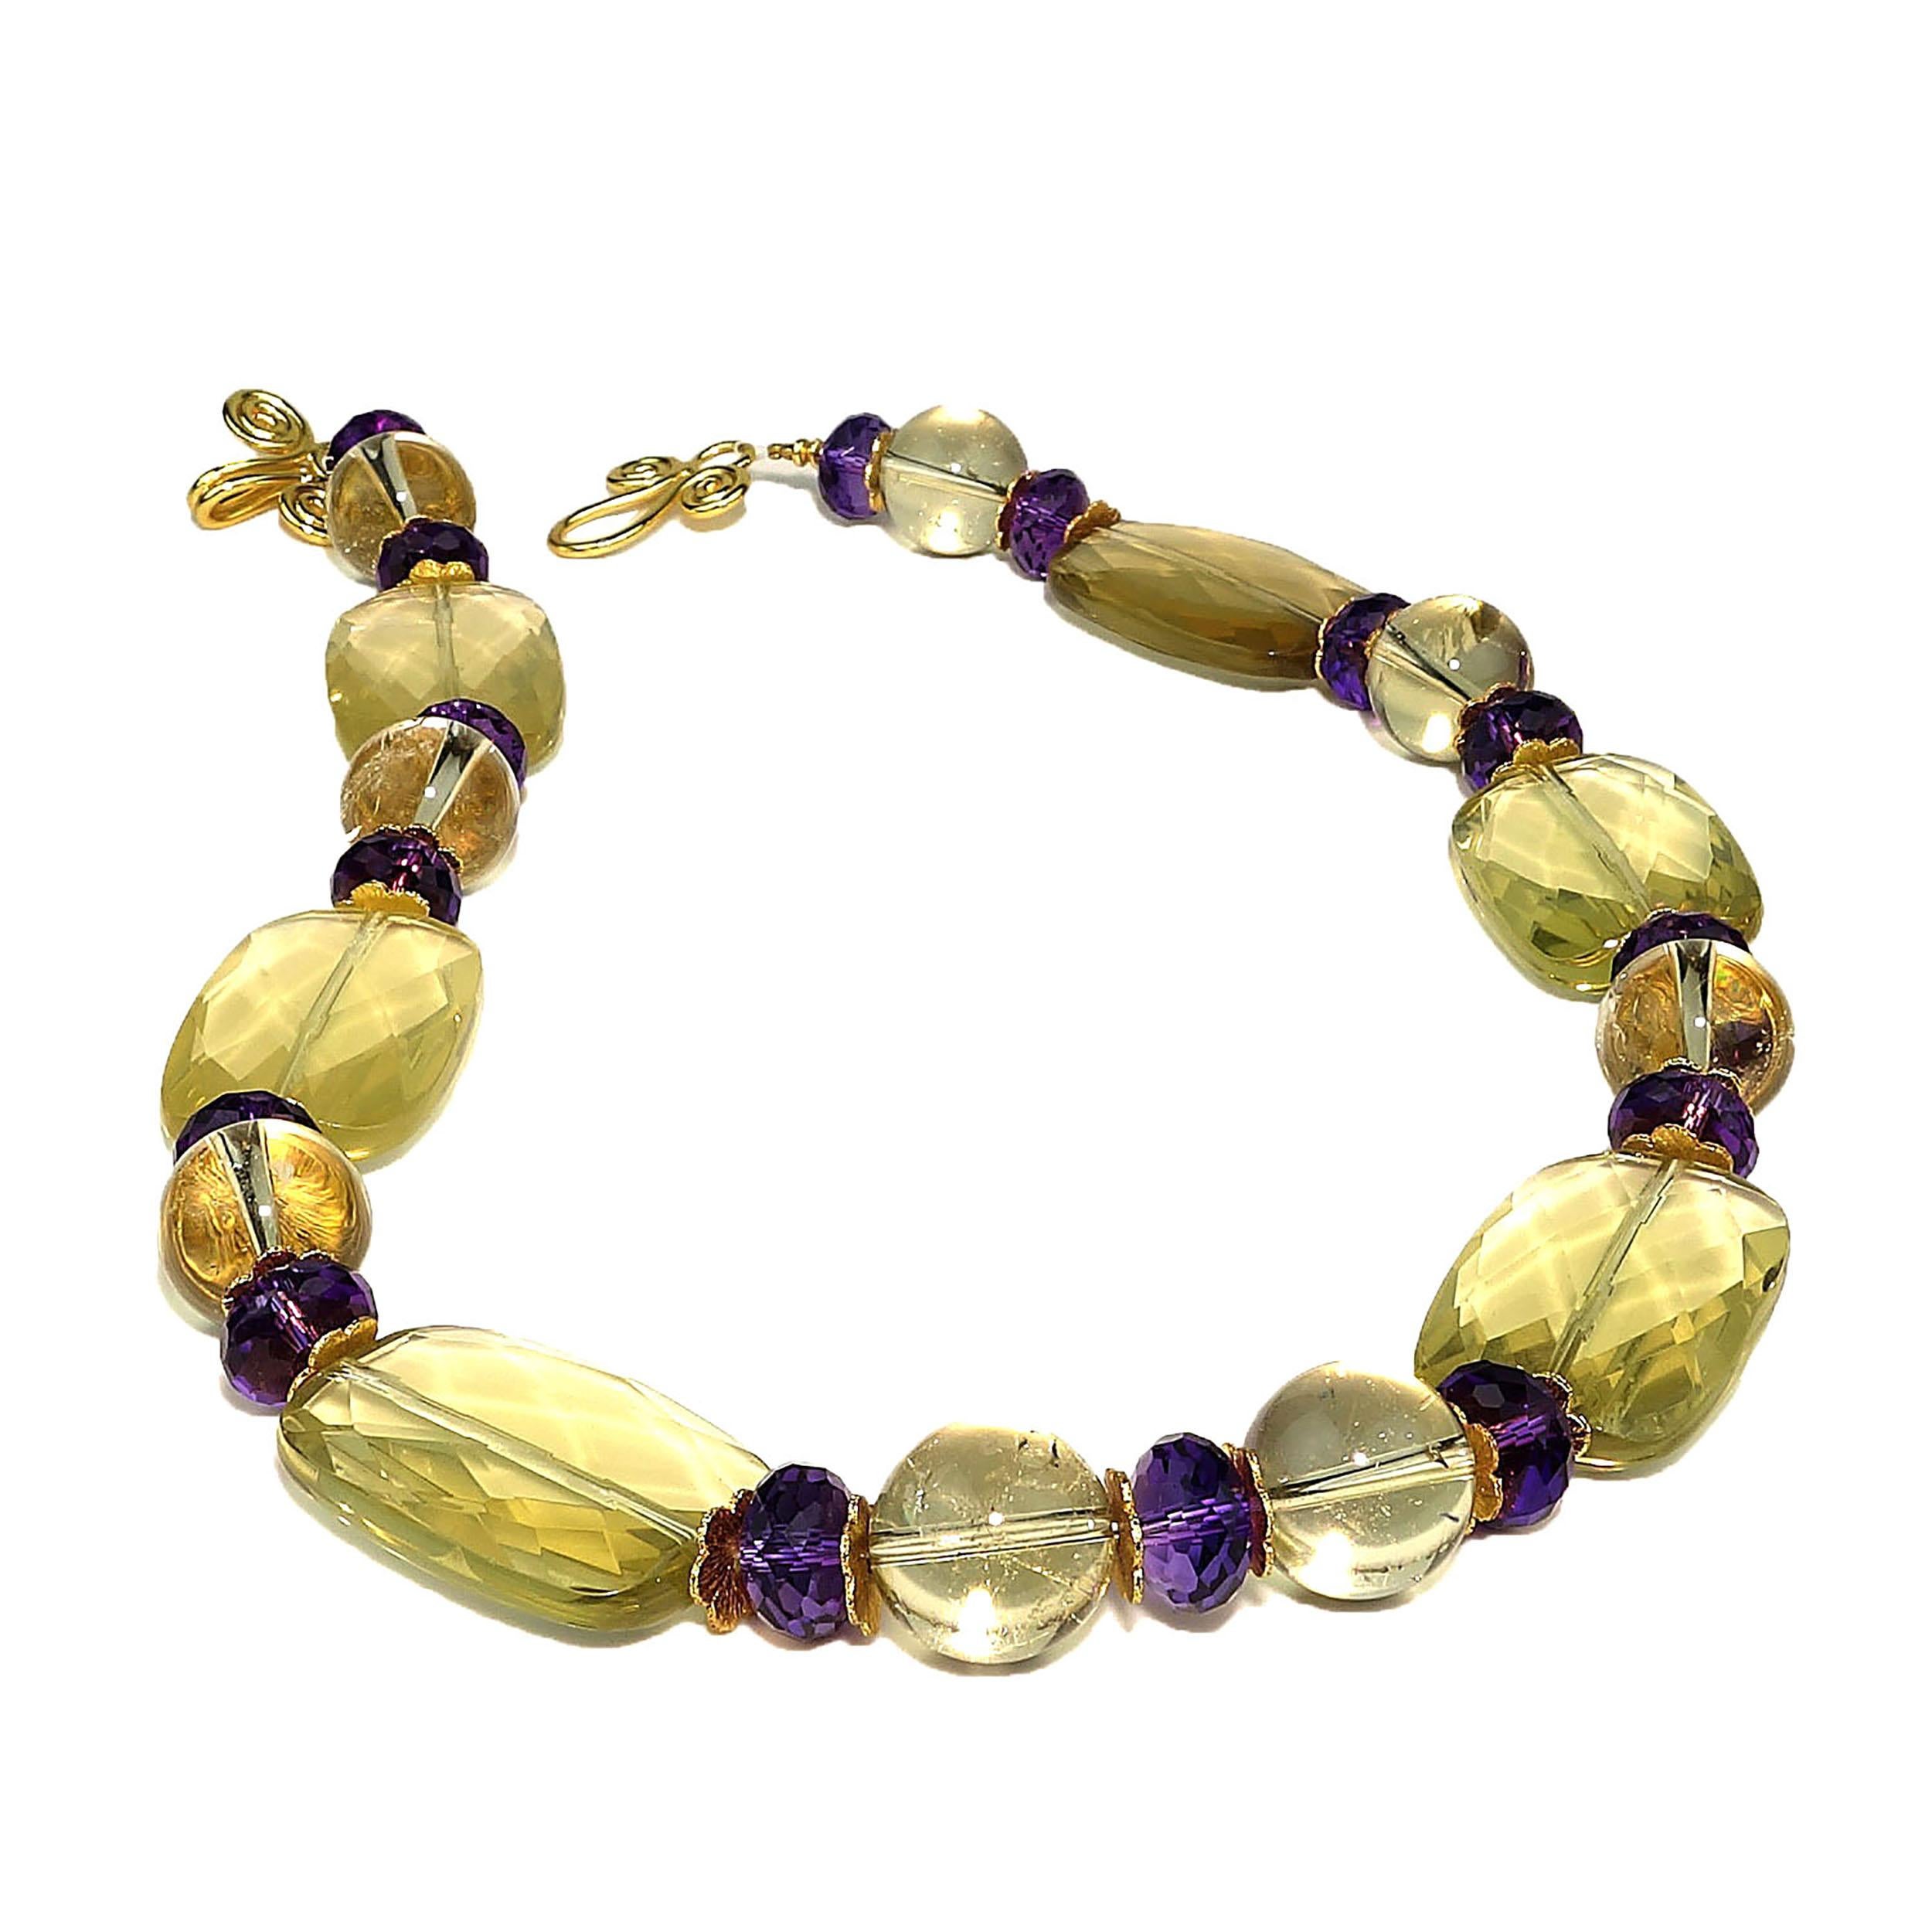 Custom made Lemon Quartz and Amethyst Necklace with gold tone accents.  This unique 18.5 inch necklace features rectangles of beautifully faceted Lemon Quartz, Lemon Quartz spheres, and sparkling Amethyst rondelles.  It is finished with a gold